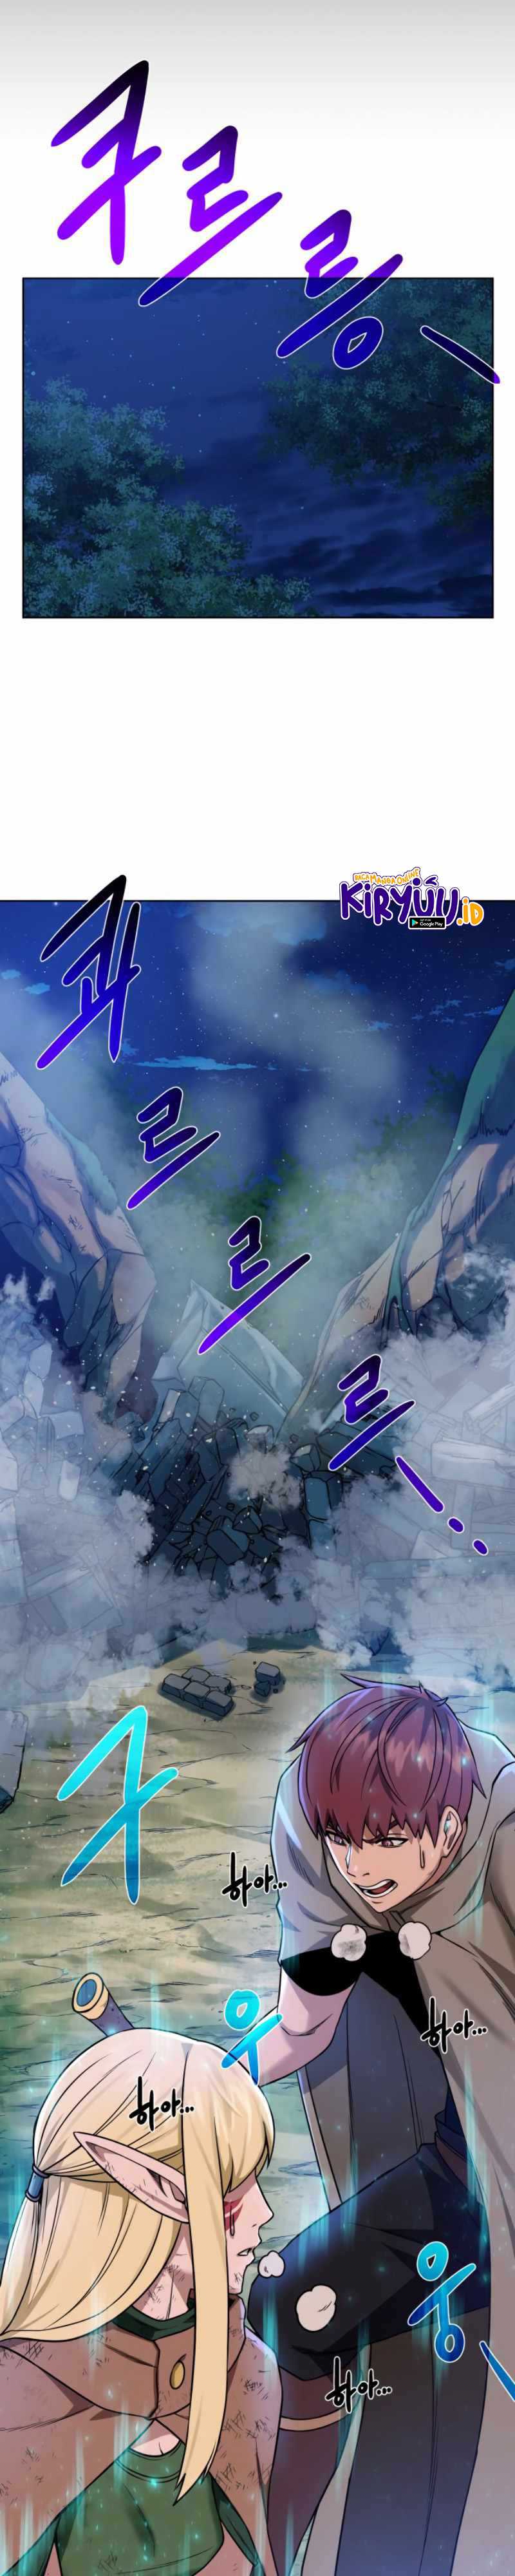 dungeons-artifacts Chapter chapter-30